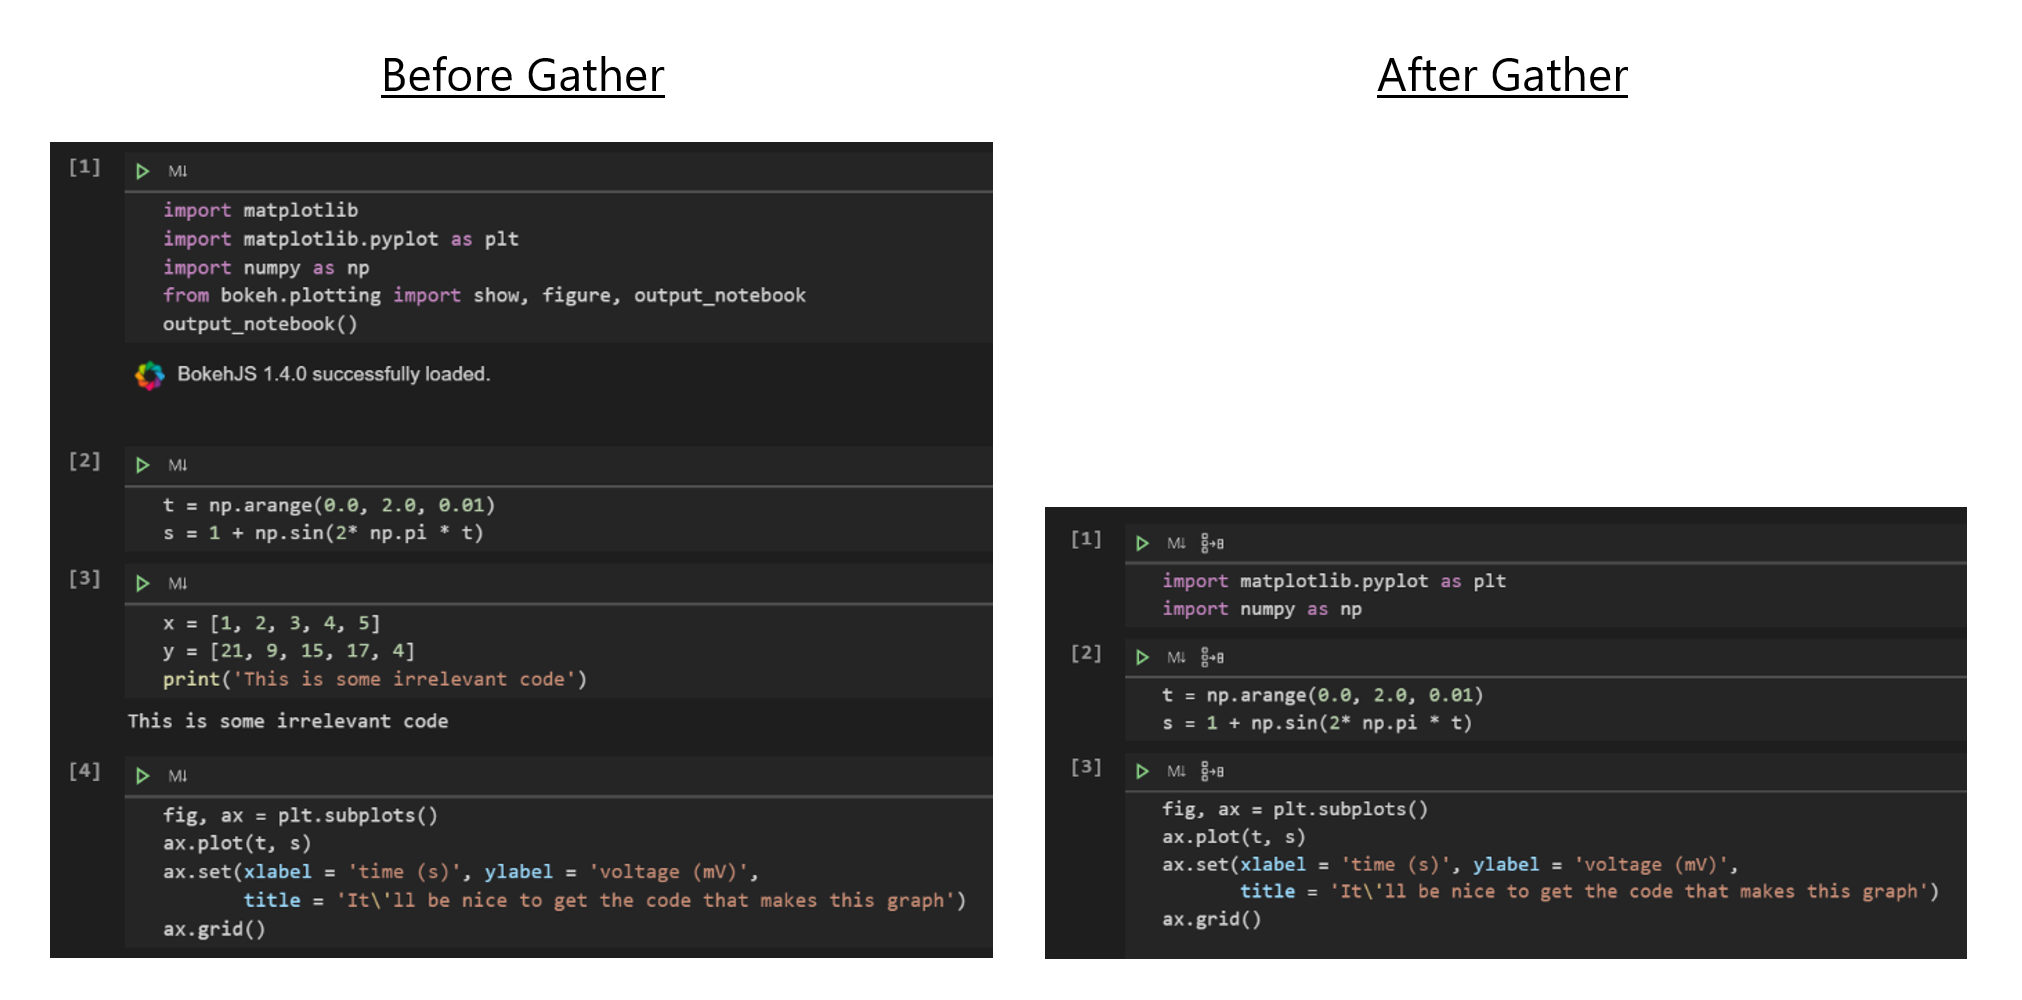 Code comparison before and after the use of Gather.